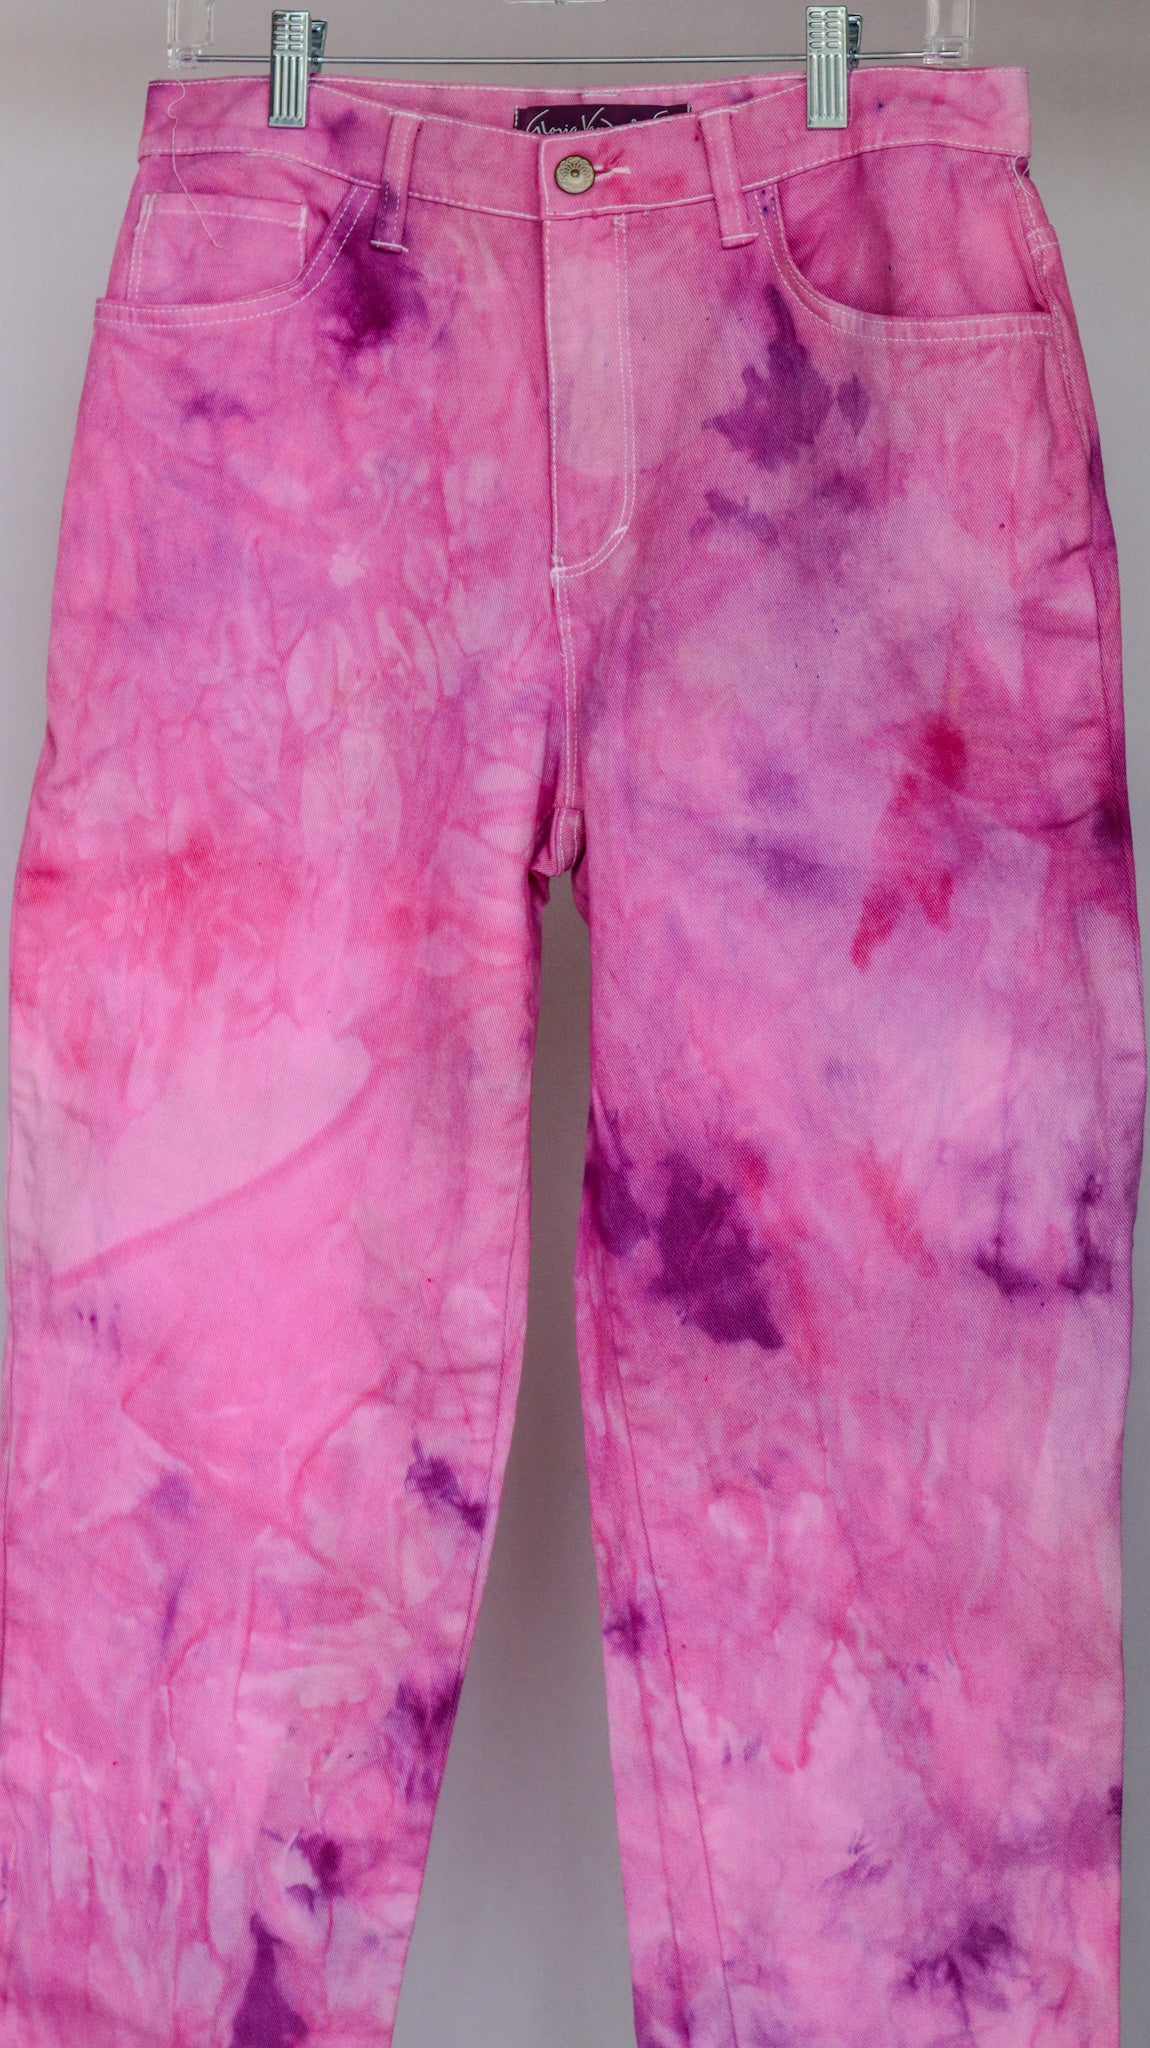 1 OF 1 CUSTOM DYED PINK JEANS